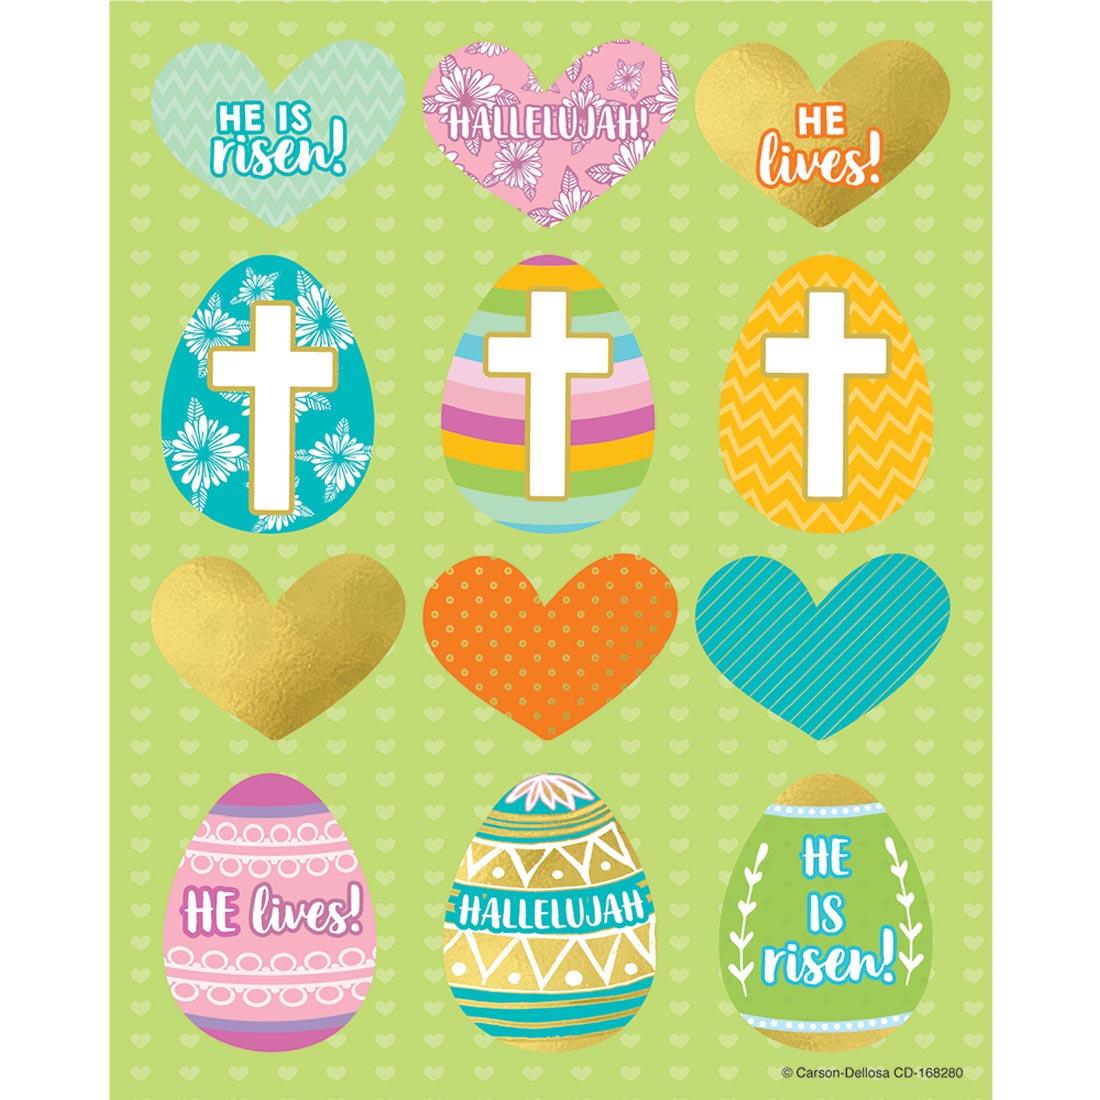 Easter Egg and Heart Shaped Stickers with sayings like He Is Risen and He Lives